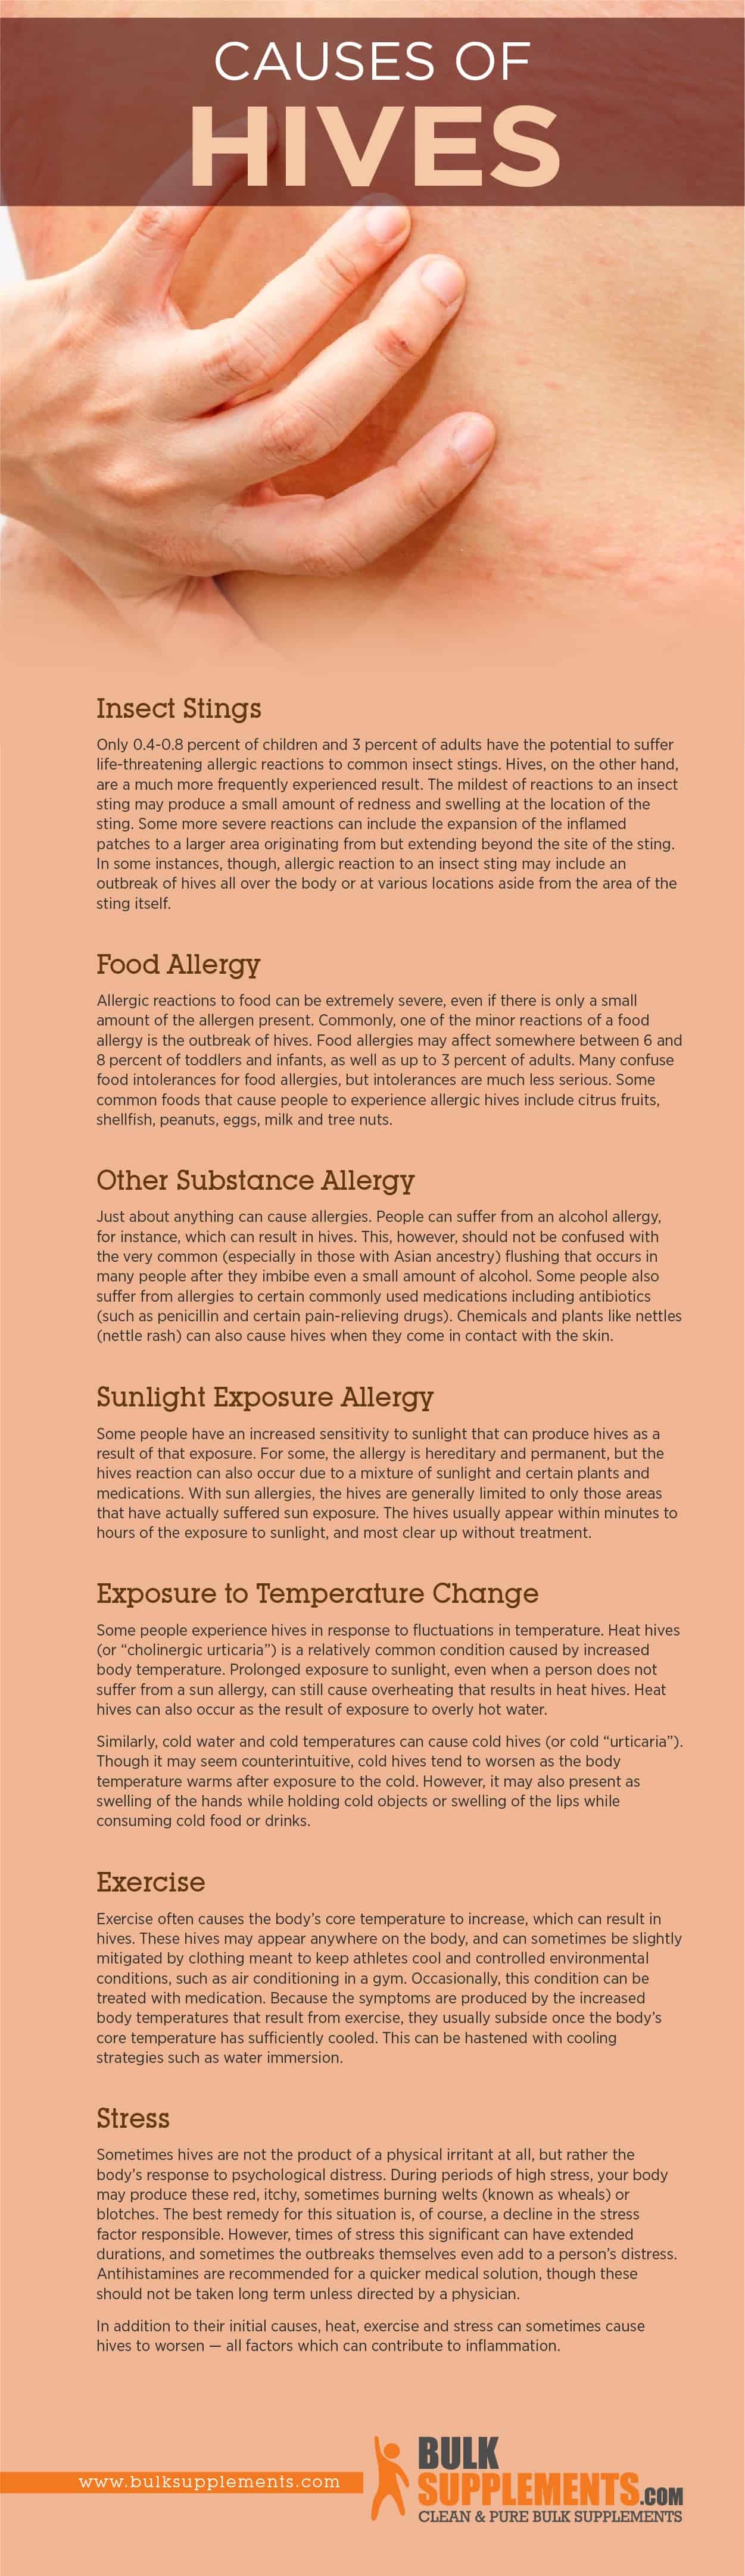 Causes of Hives